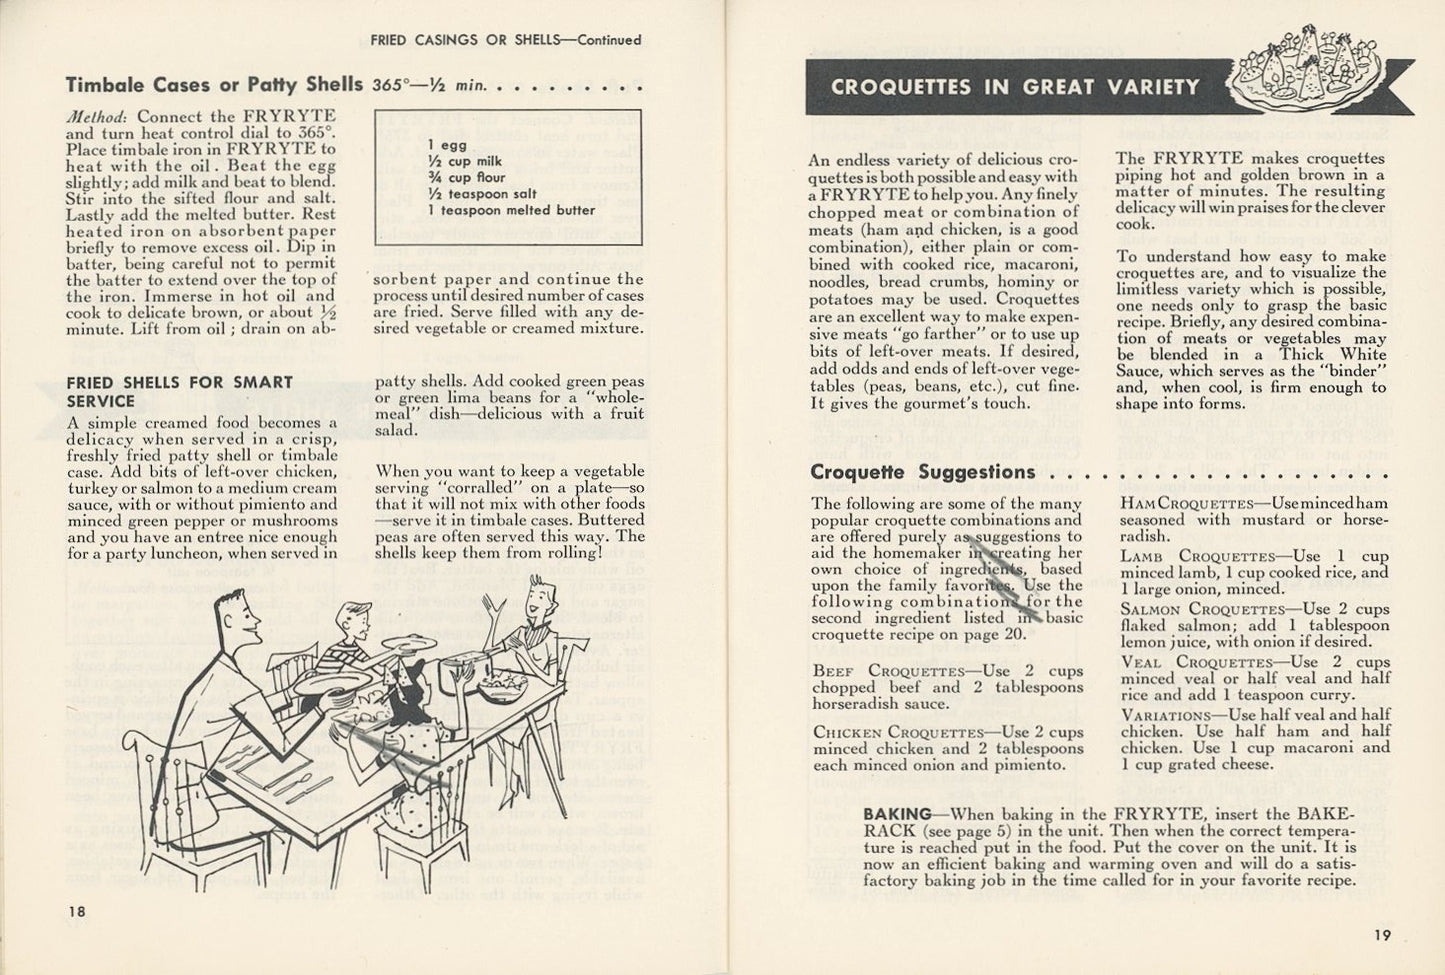 OVER 100 RECIPES FOR TASTE-TEMPTING DEEP FRIED FOODS Booklet Published by Dulane Fryryte Circa 1953